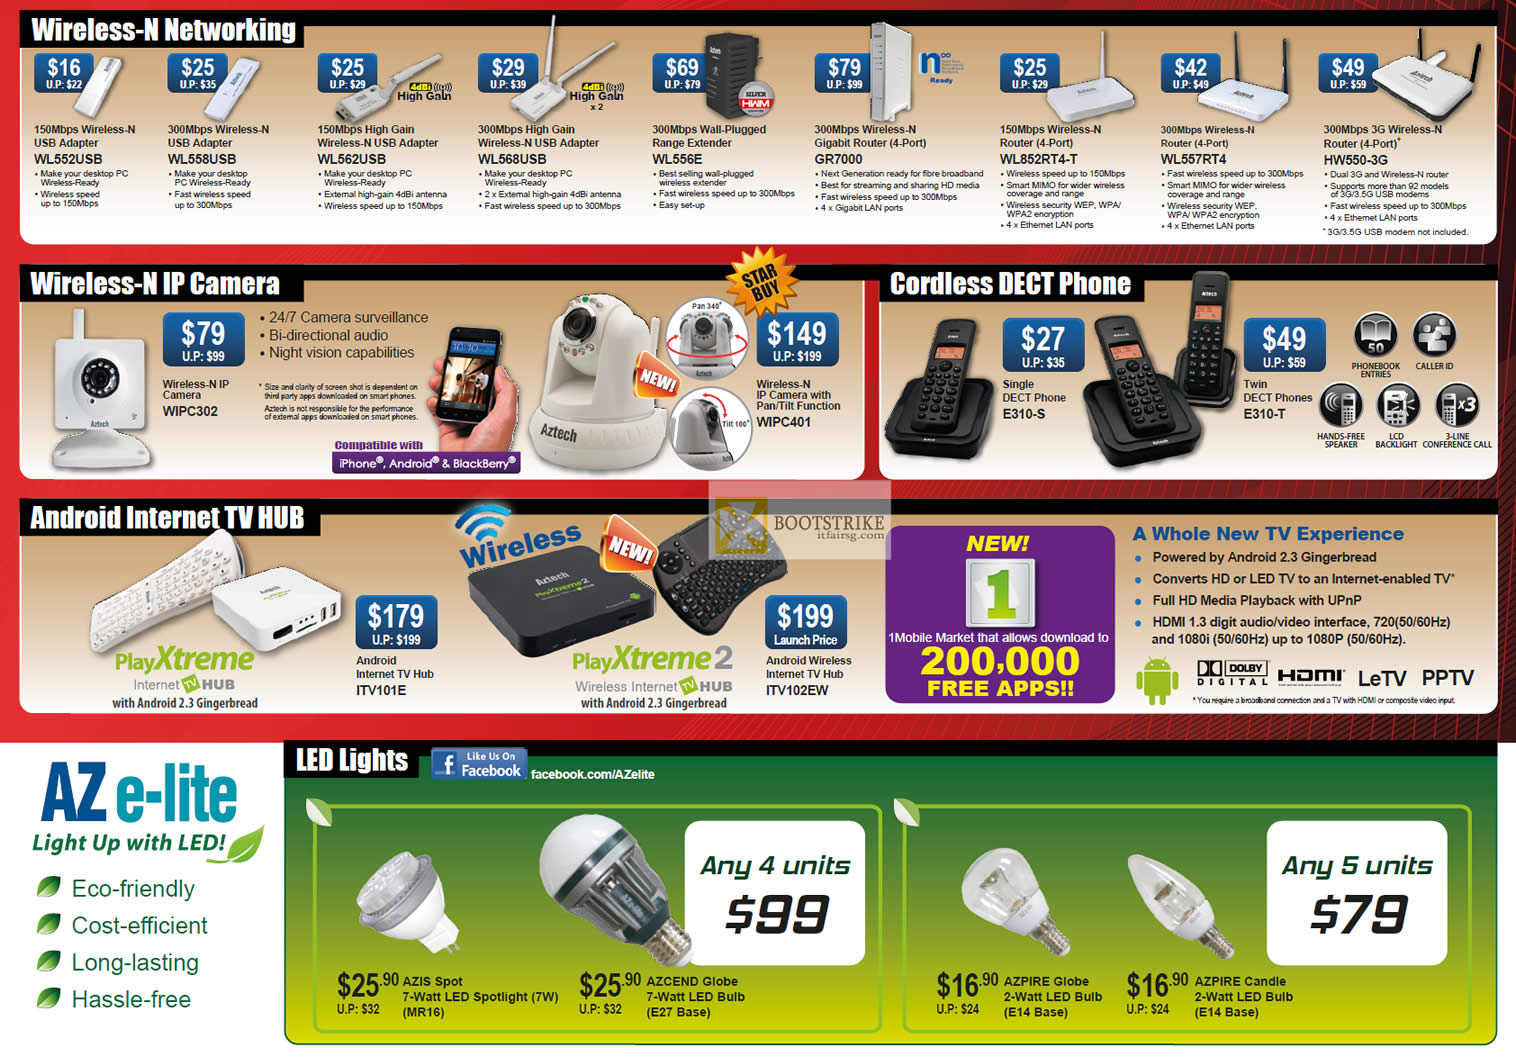 IT SHOW 2012 price list image brochure of Aztech Networking Wireless N USB Adapter, Router, Range Extender WL556E, IPCam WIPC302, WIPC401, DECT Phone, Andorid Internet TV Media Player, LED Lights